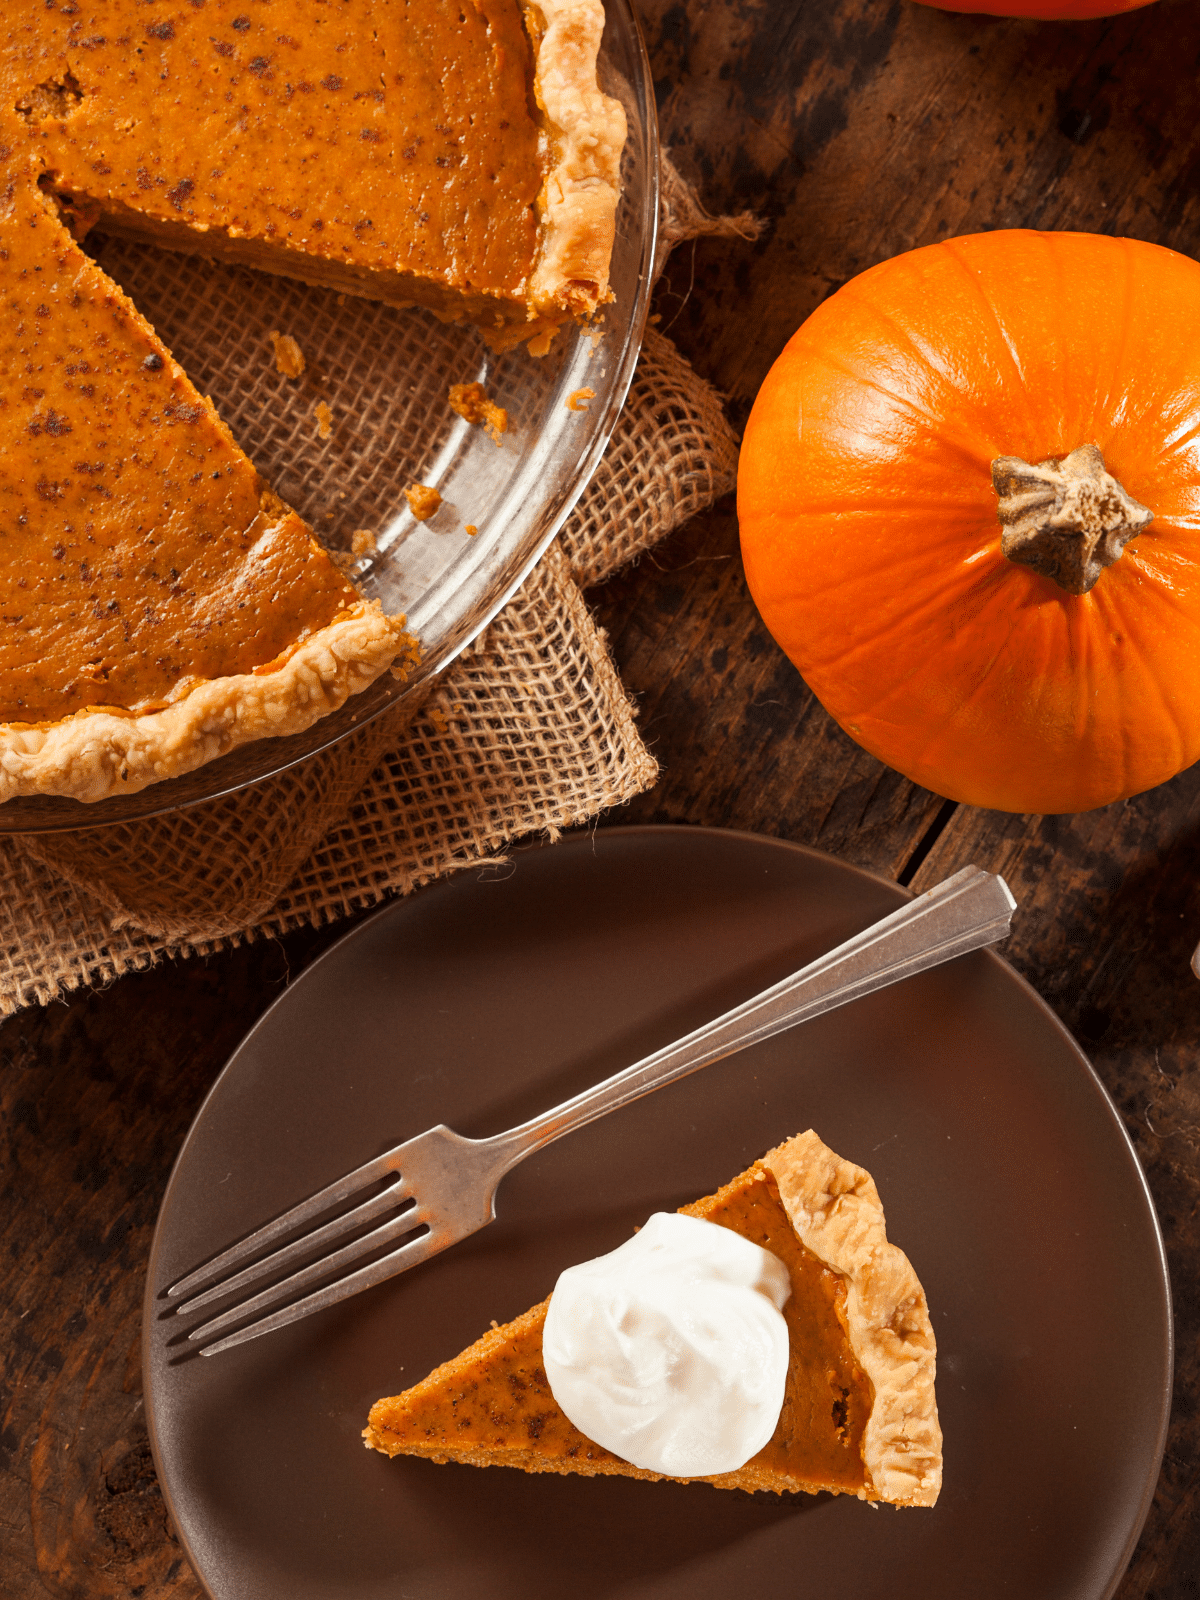 A slice of pumpkin pie on a plate with a fork. Pumpkin and sliced pumpkin pie on the side.